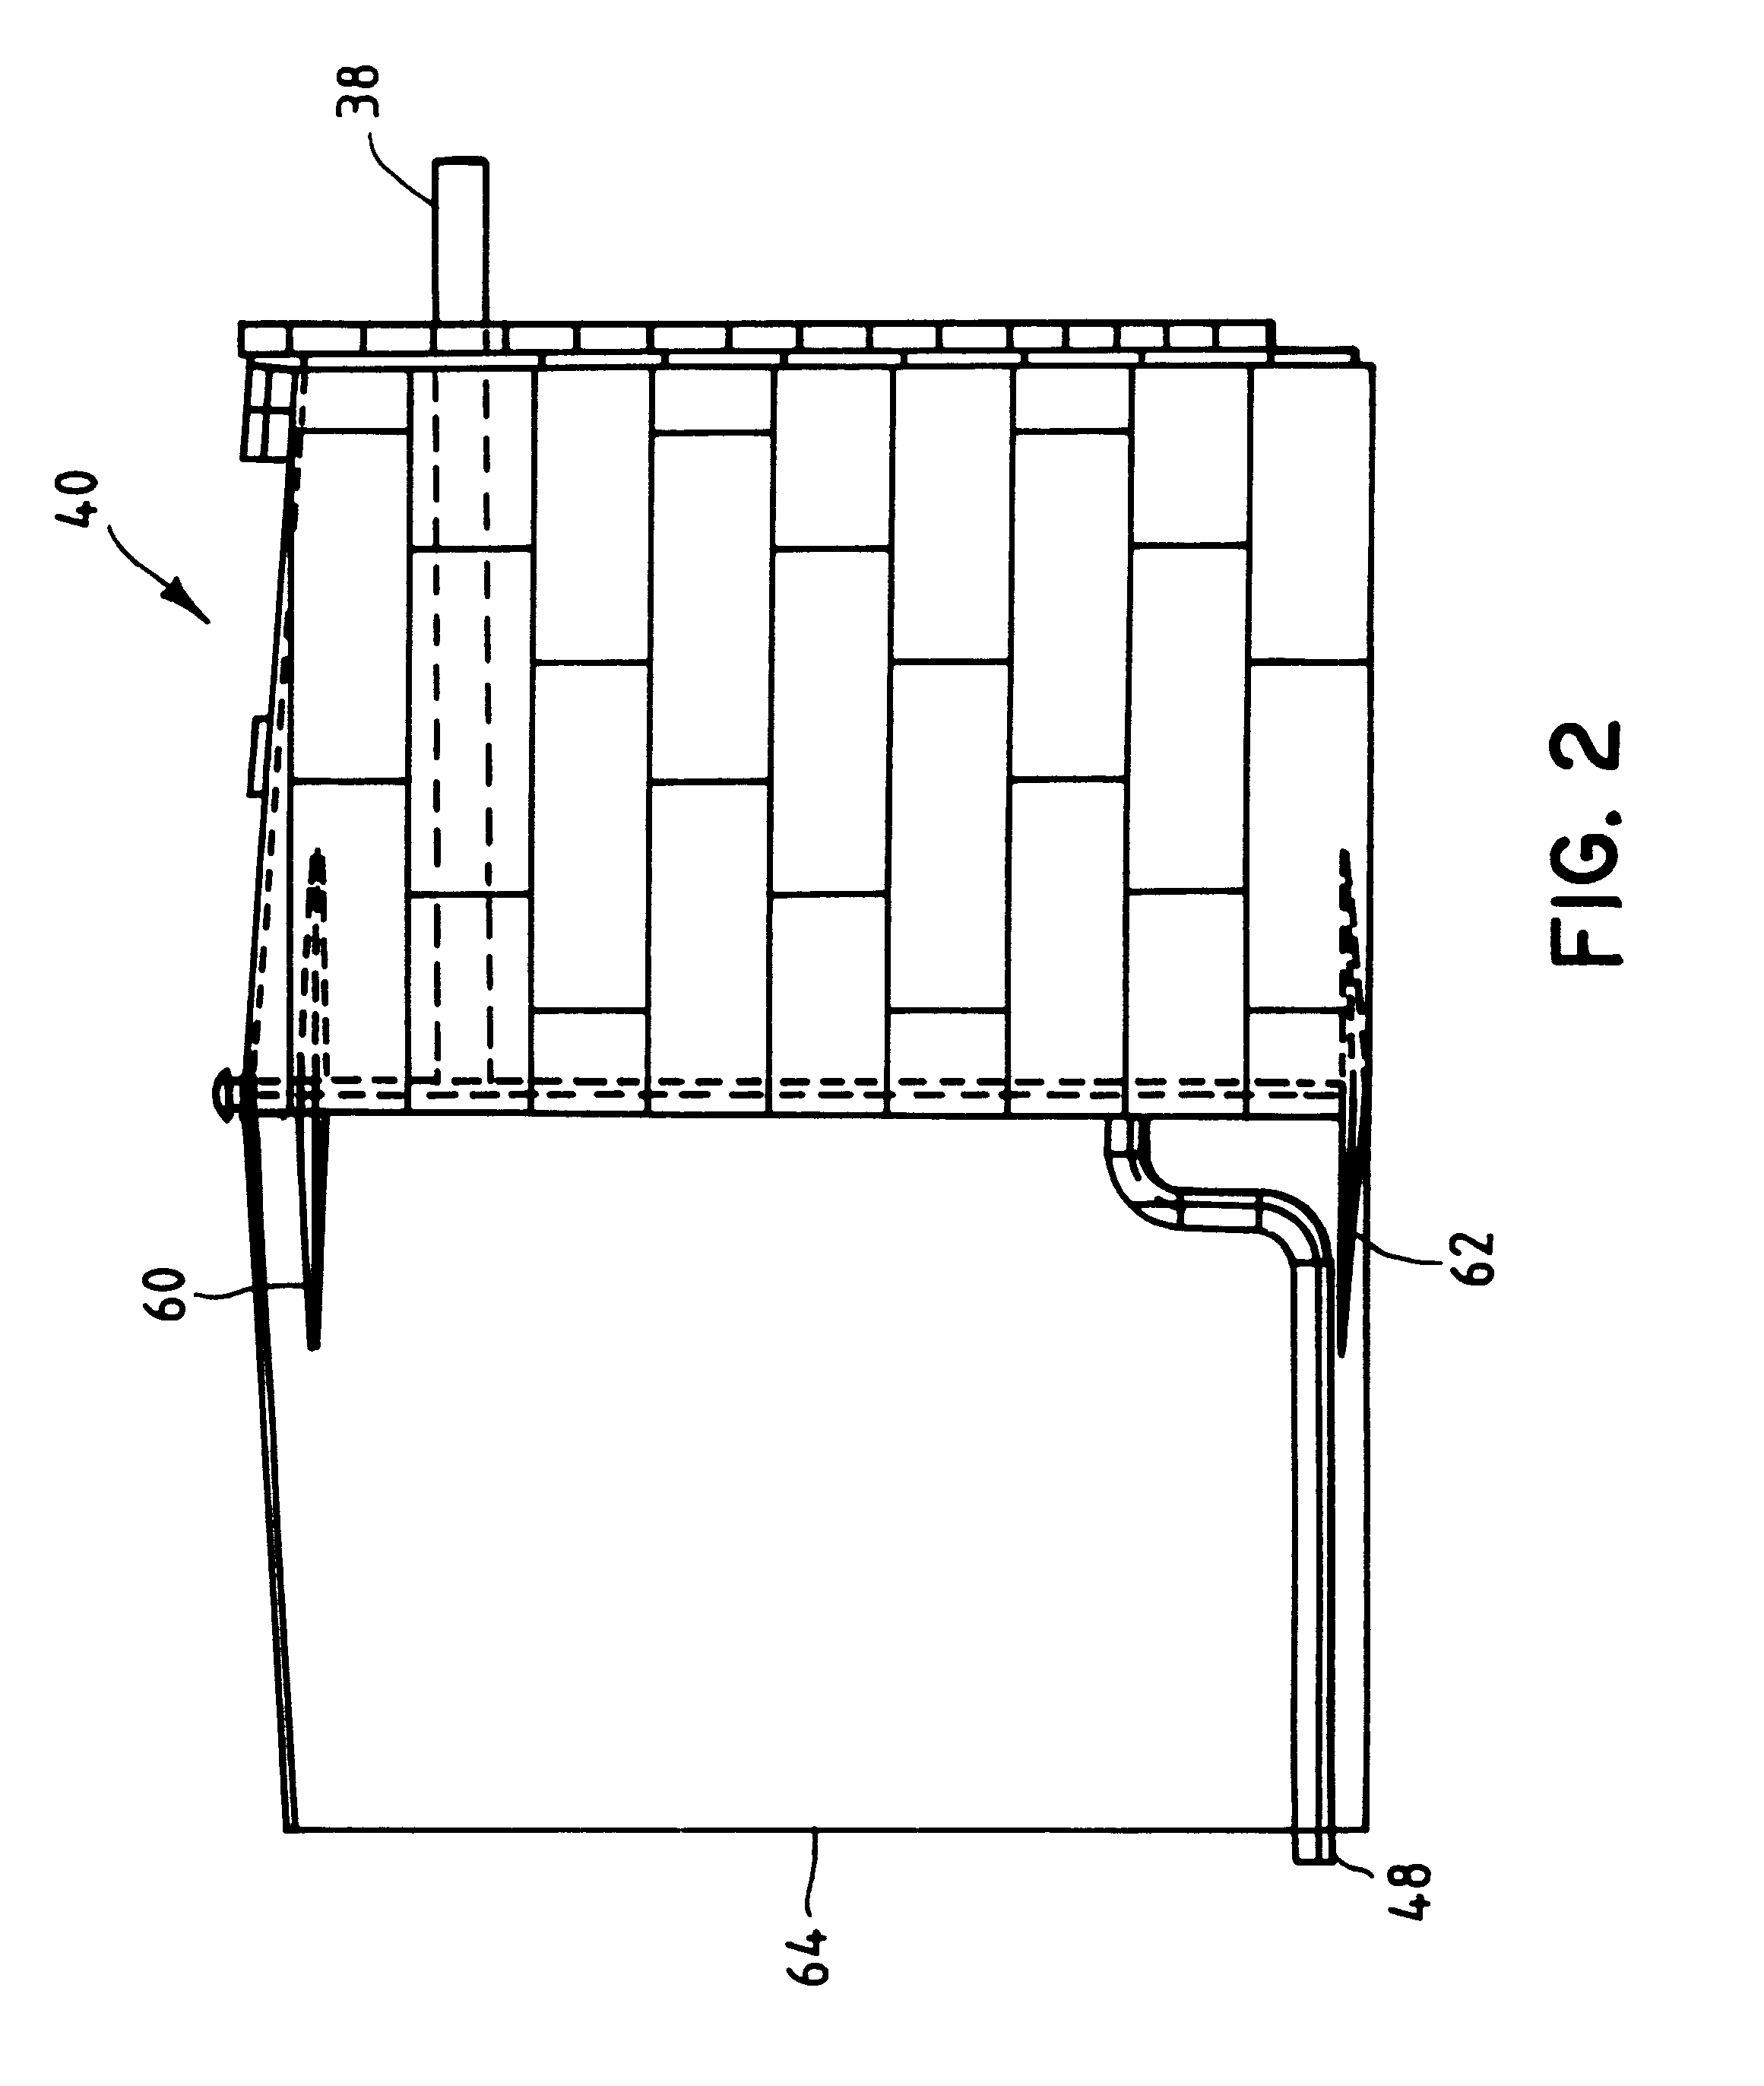 Method and apparatus for enhancing power output and efficiency of combustion turbines